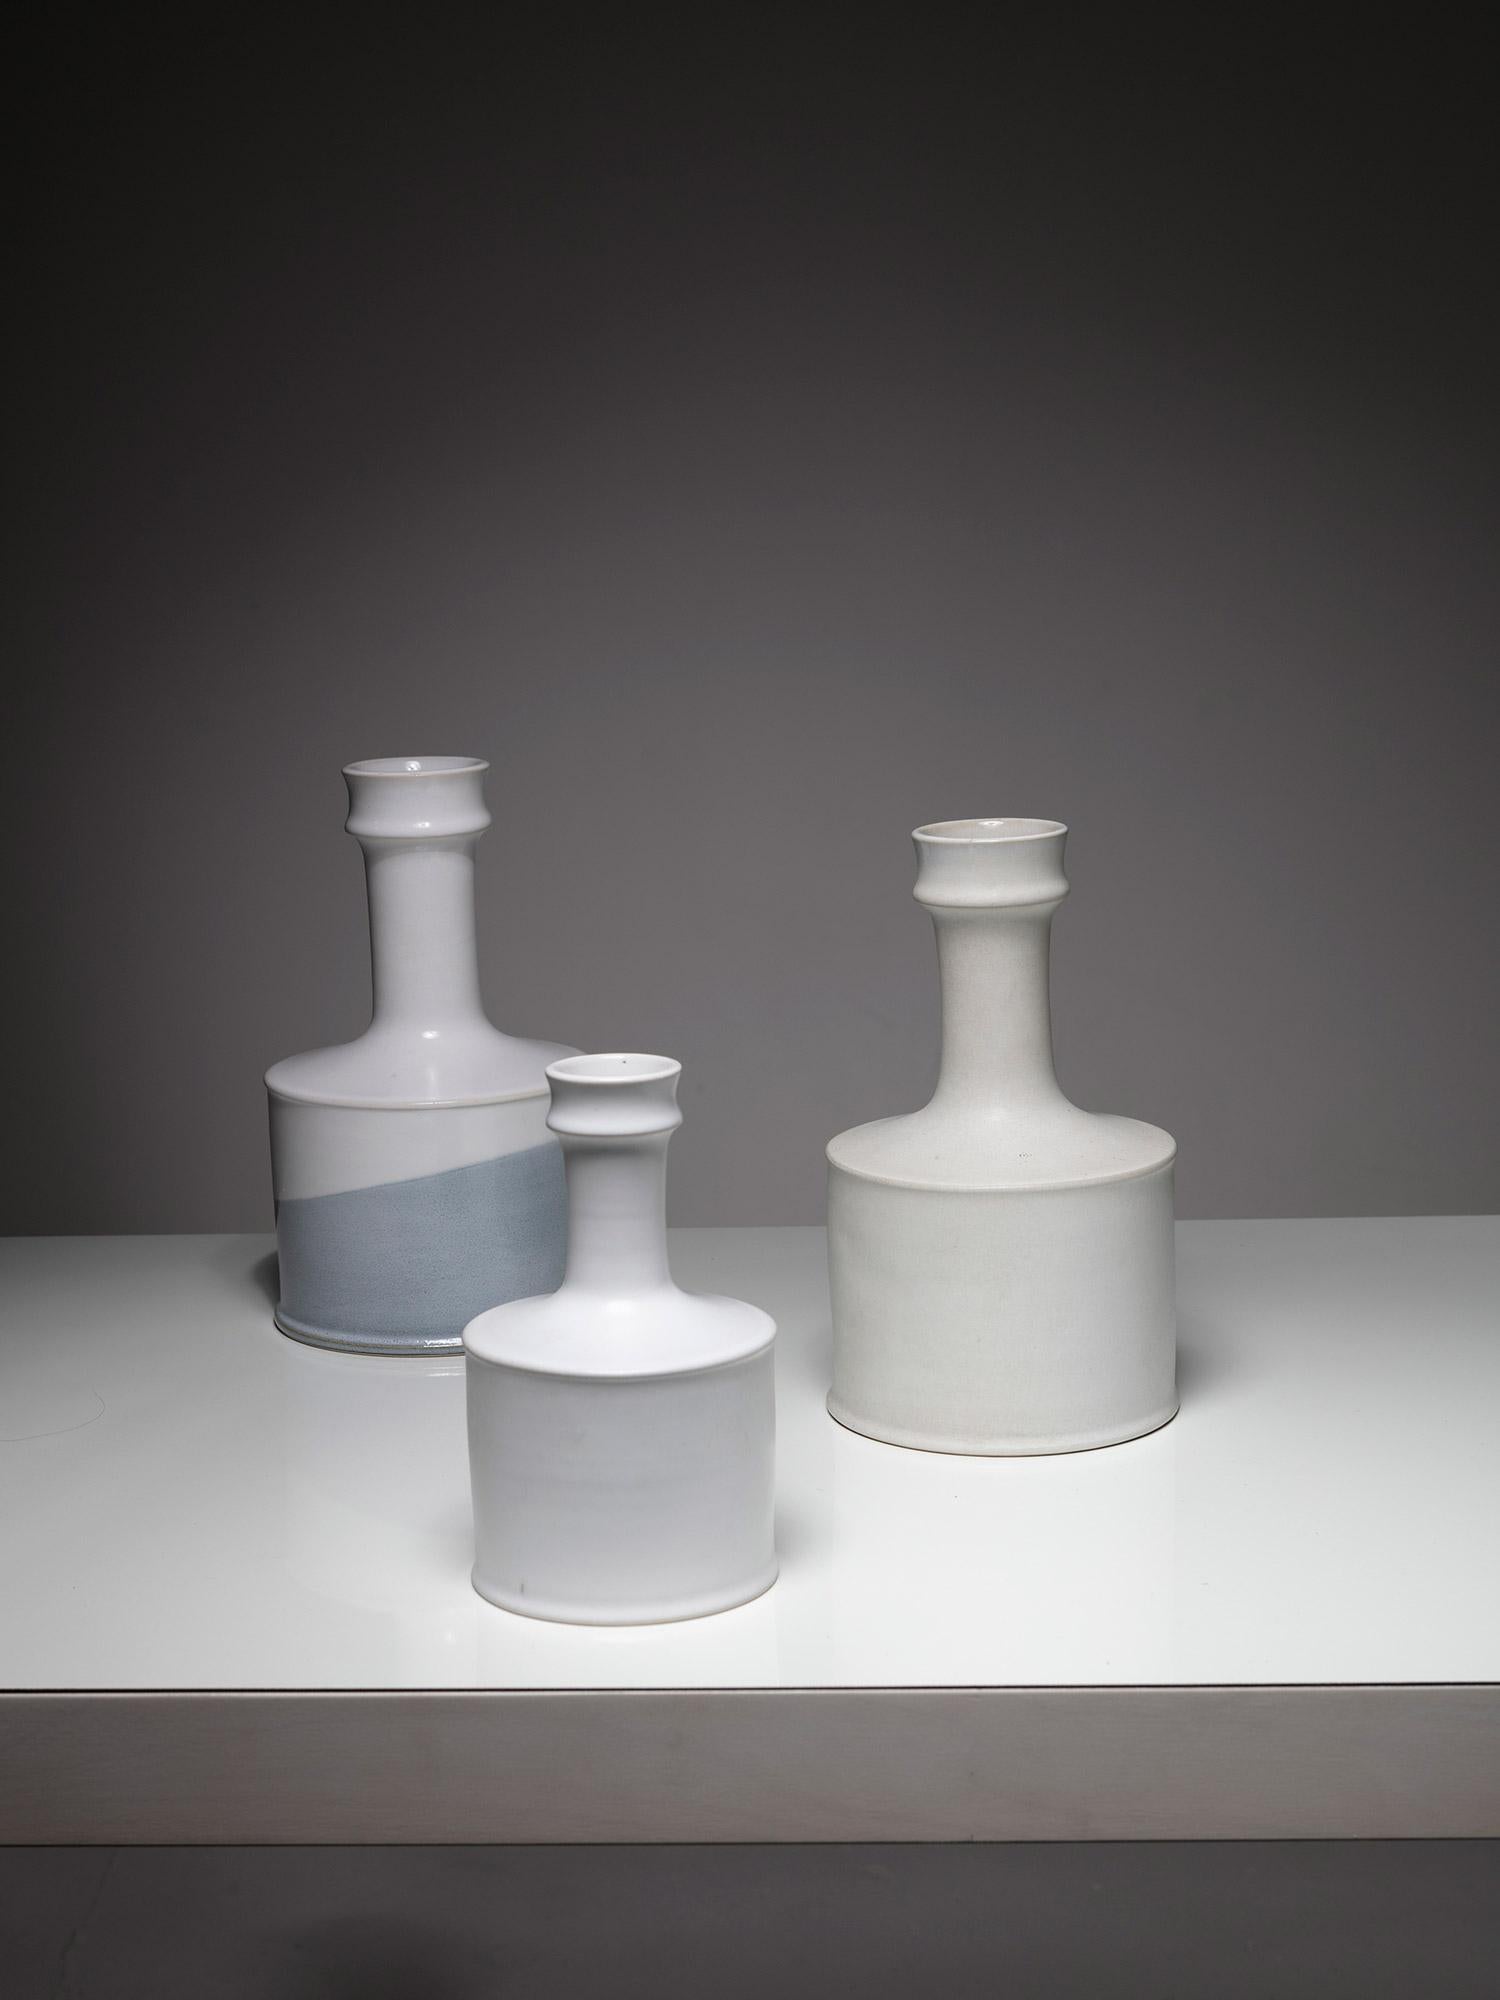 Remarkable set of three vases by Nanni Valentini for Franco Bucci/Laboratorio Pesaro.
Different sizes and colors for this unique decorative set.